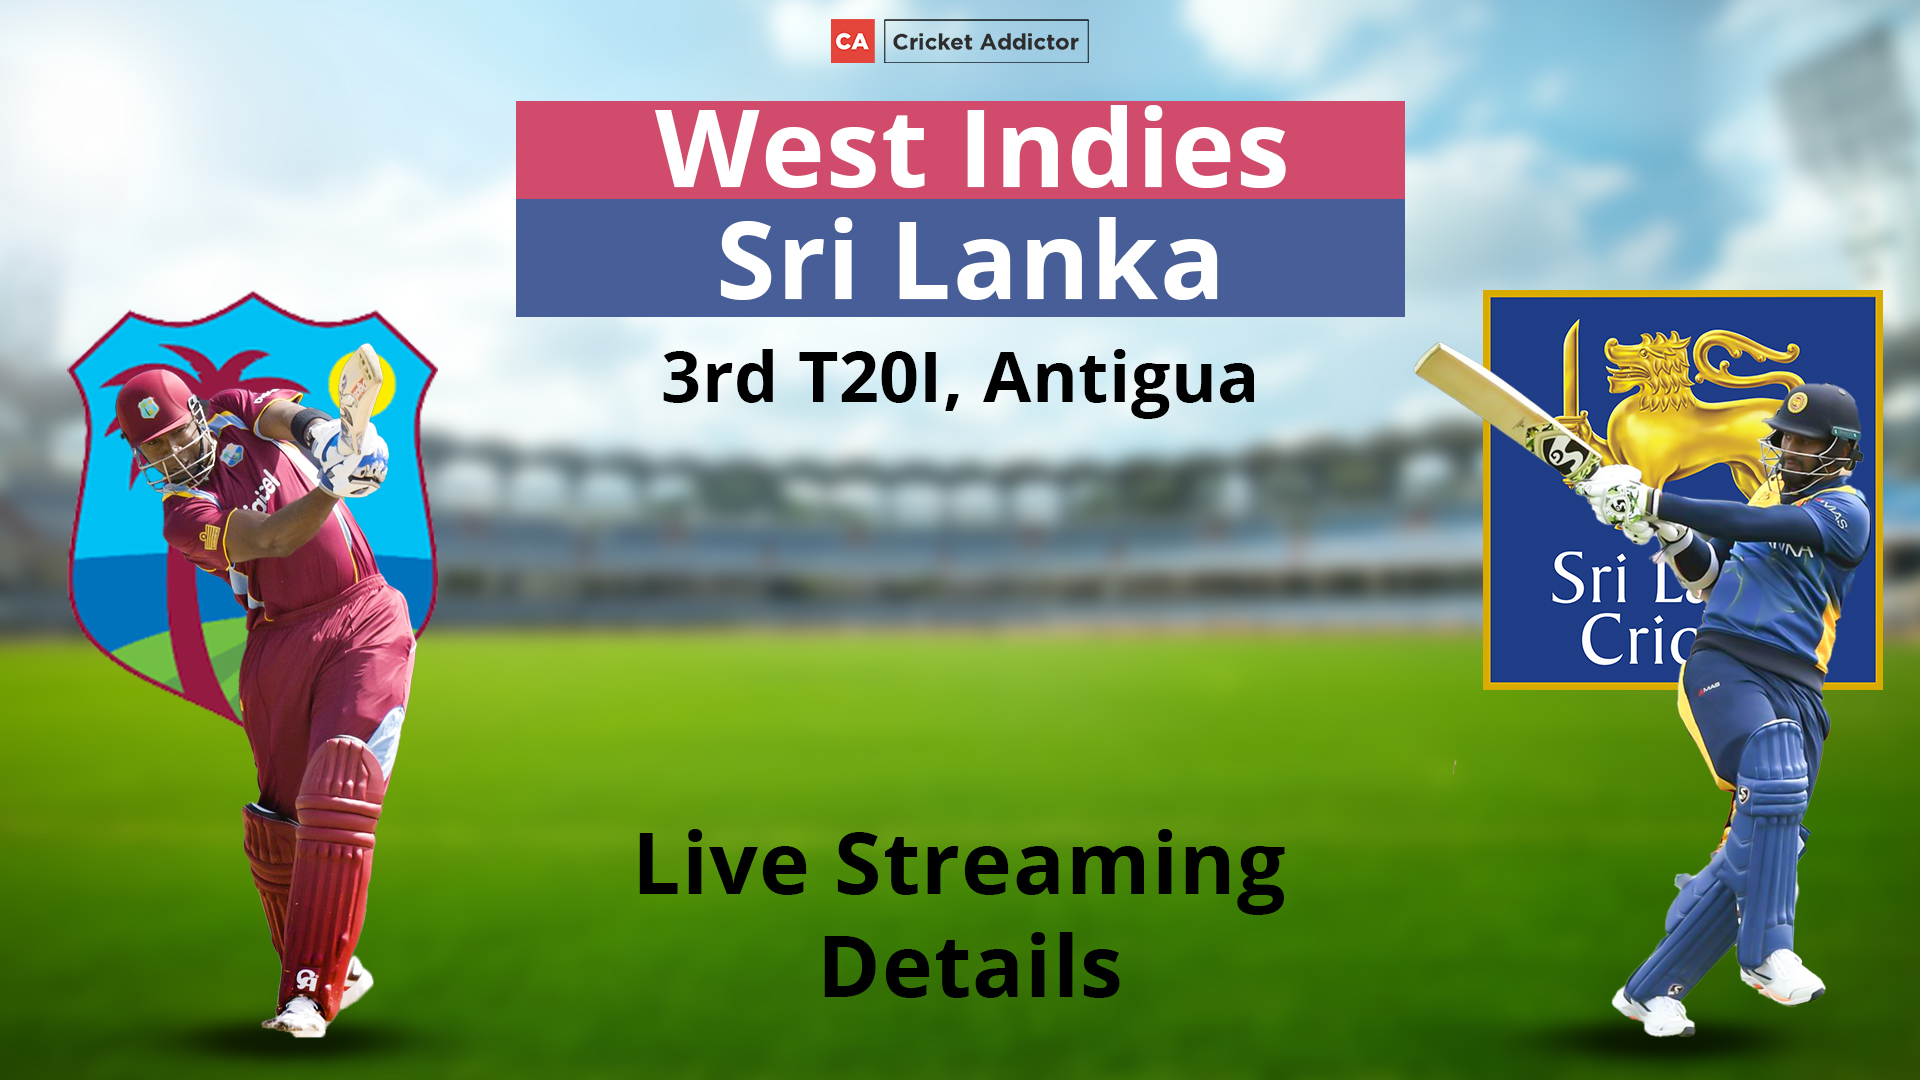 West Indies vs Sri Lanka 2021, 3rd T20I: When And Where To Watch, Live Streaming Details